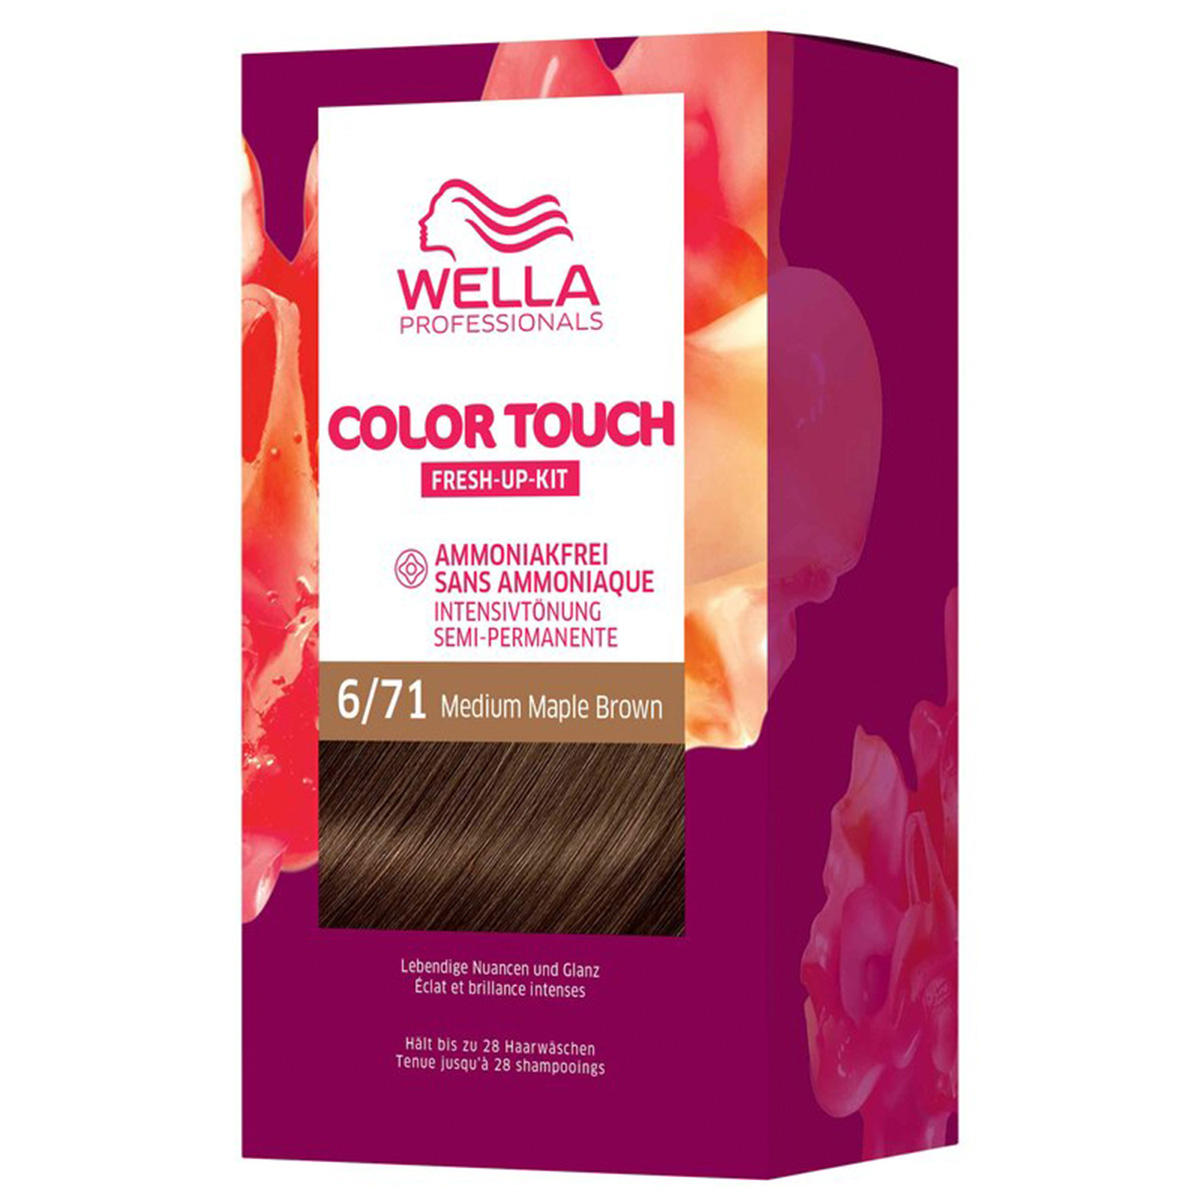 Wella Color Touch Fresh-Up-Kit 6/71 Castaño rubio oscuro 130 ml - 1